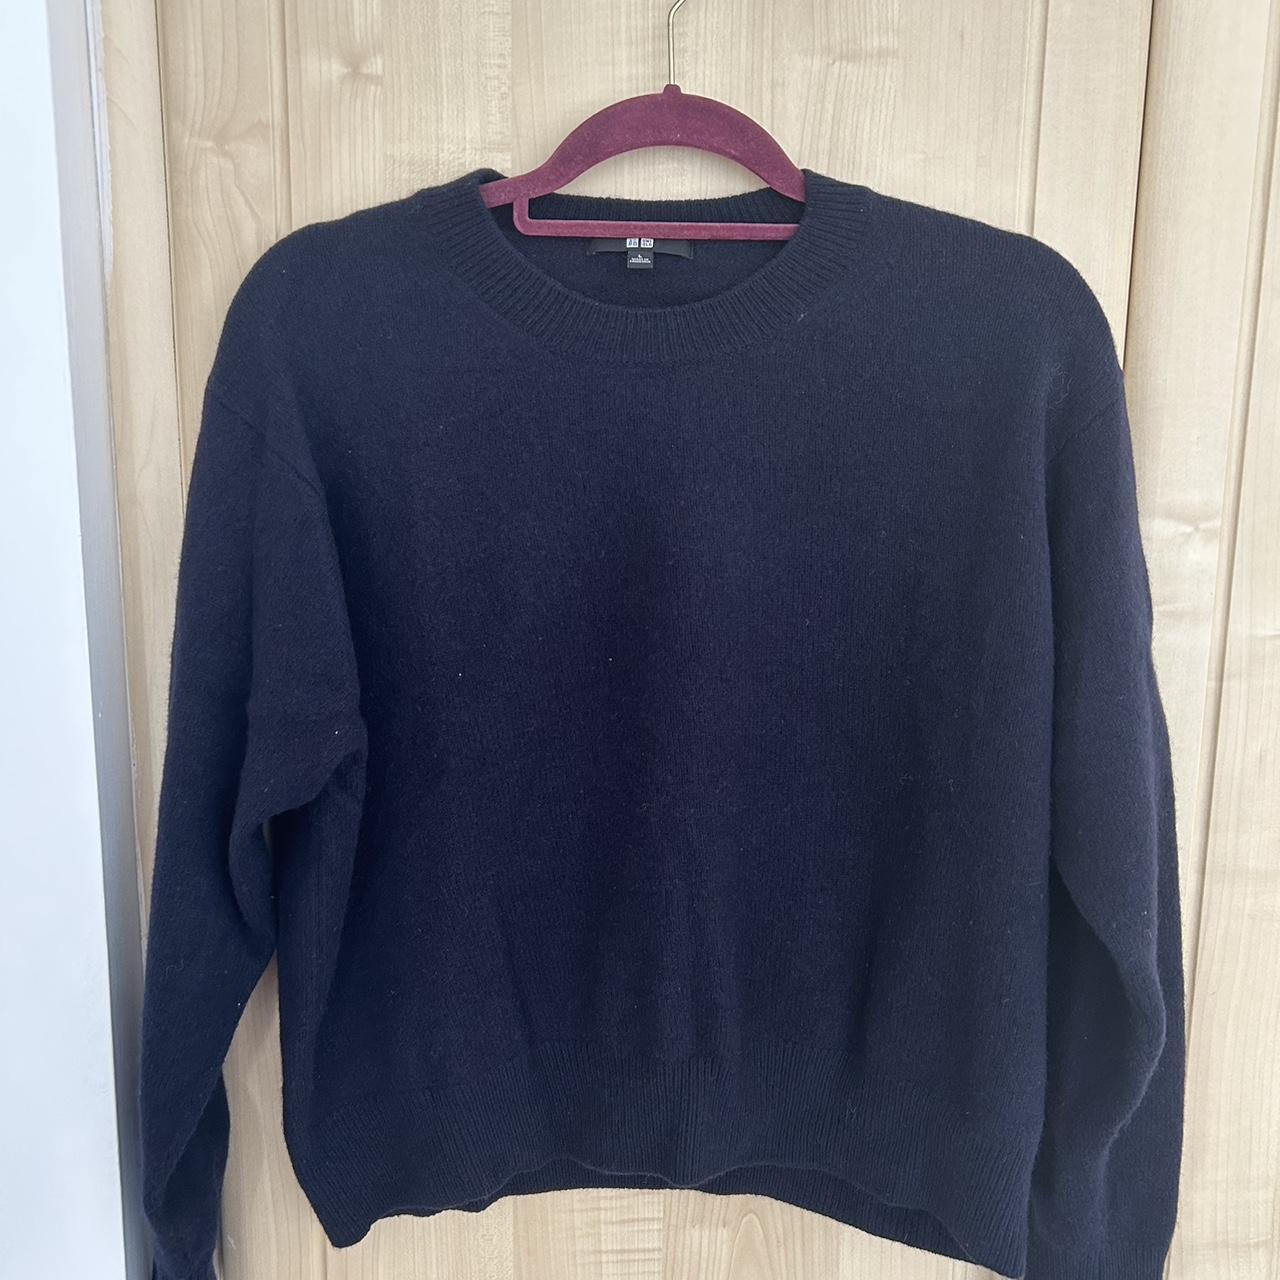 Navy Uniqlo lambs wool jumper. Really cute and cosy,... - Depop